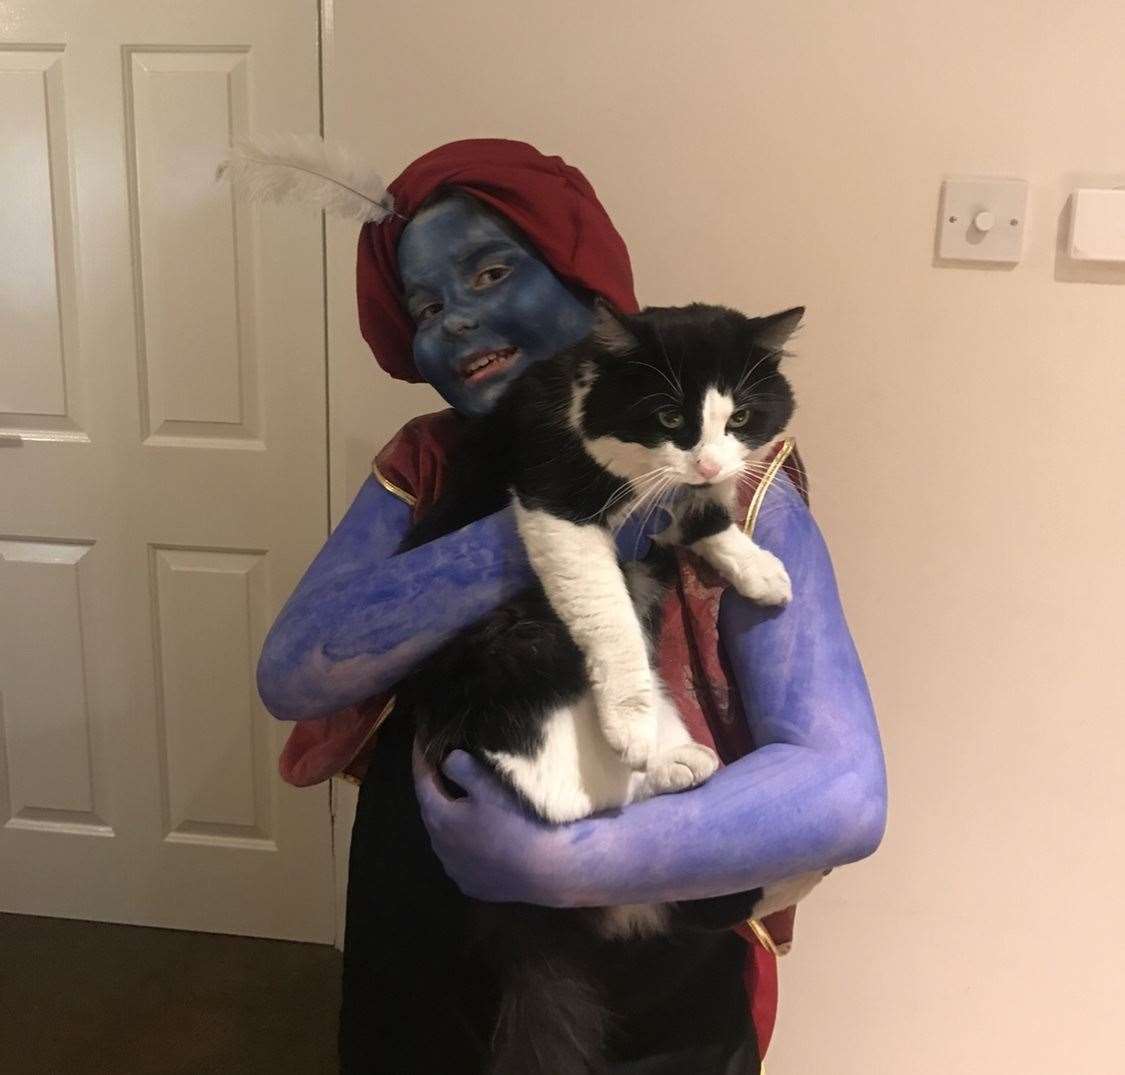 Liam, who is dressed as the Genie from Aladdin, with his much loved pet Ranger. Picture: Keeley Richards (31557457)